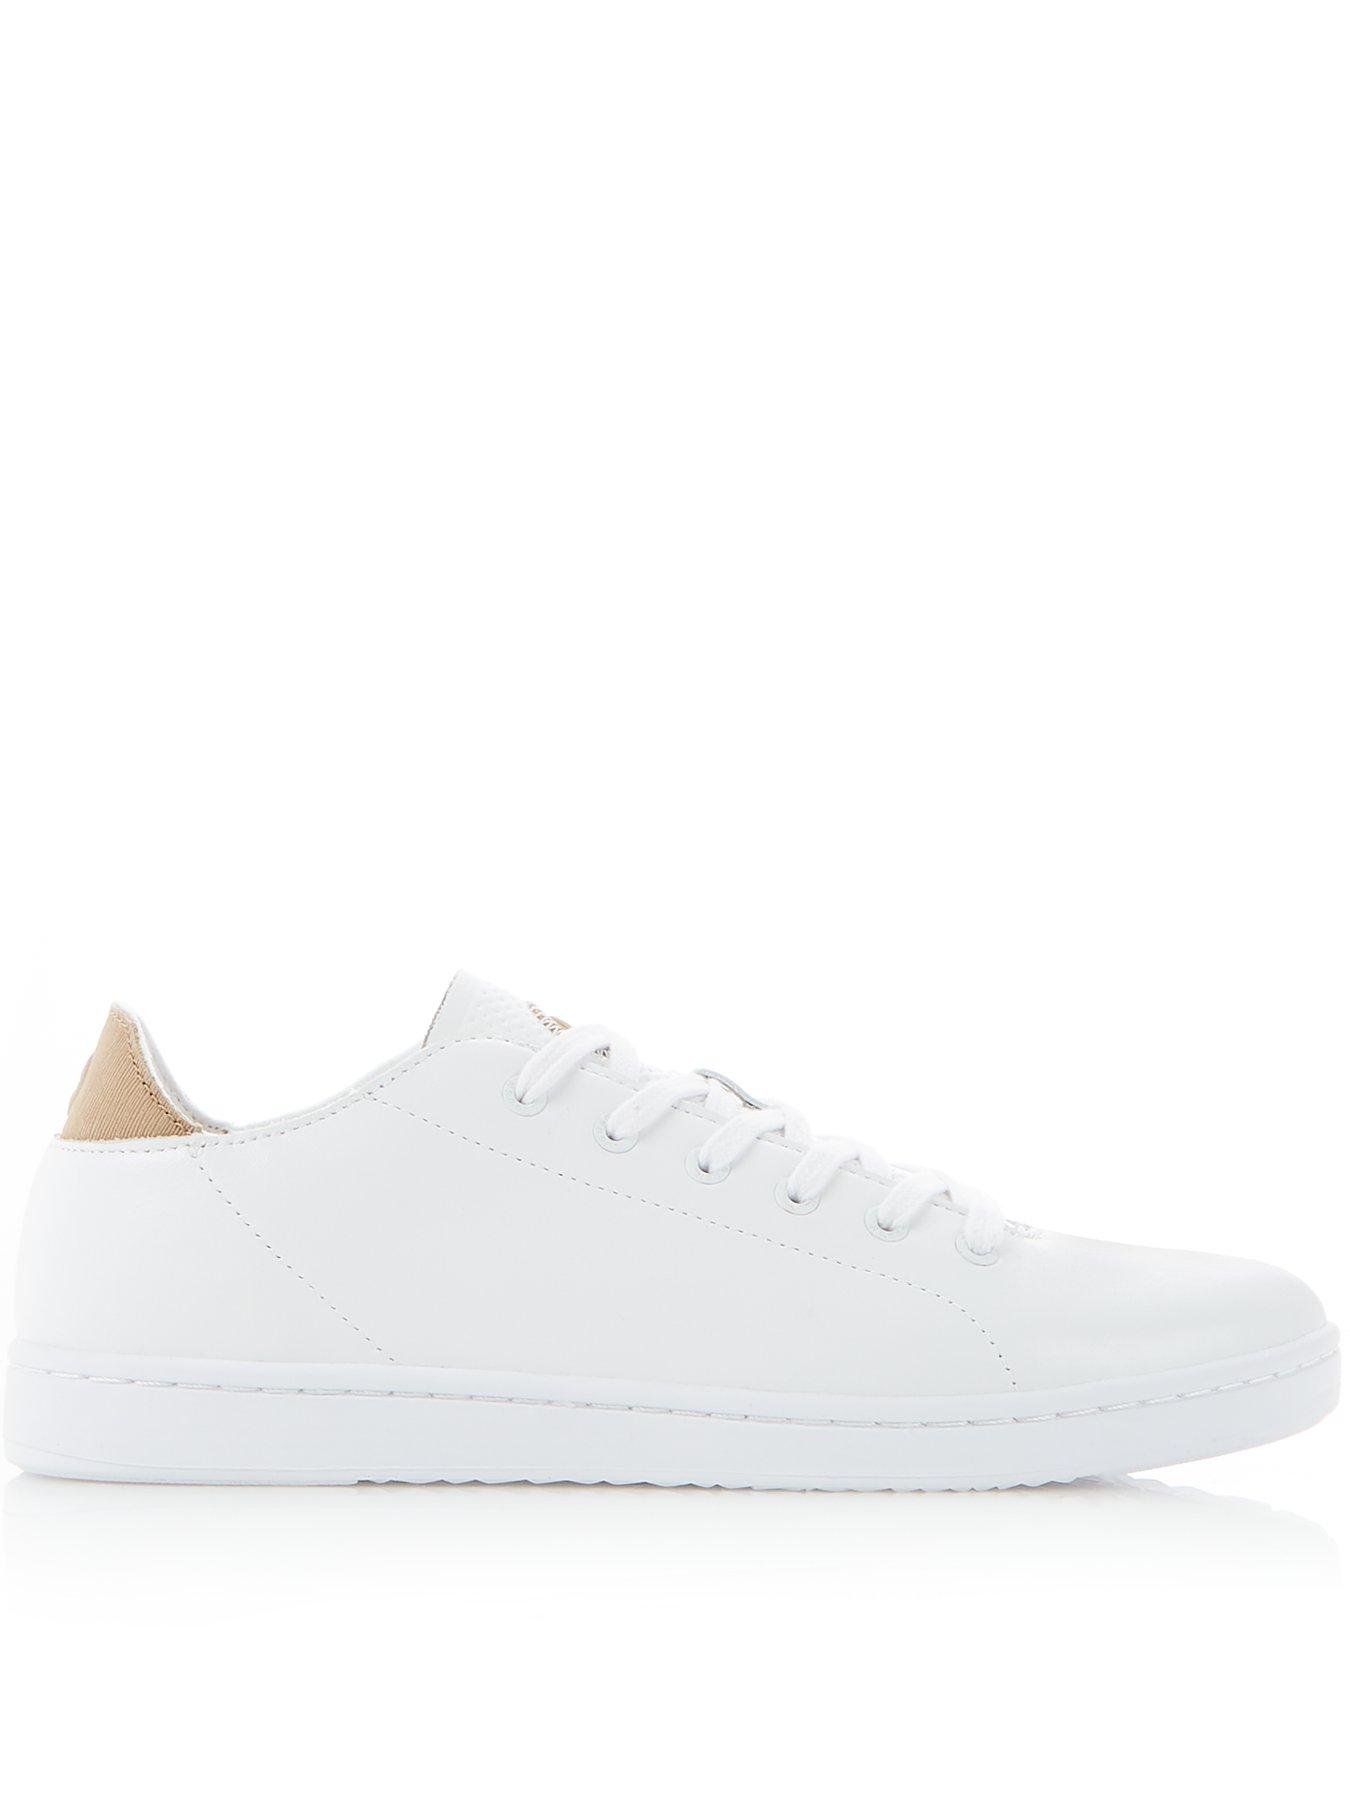 woden white trainers